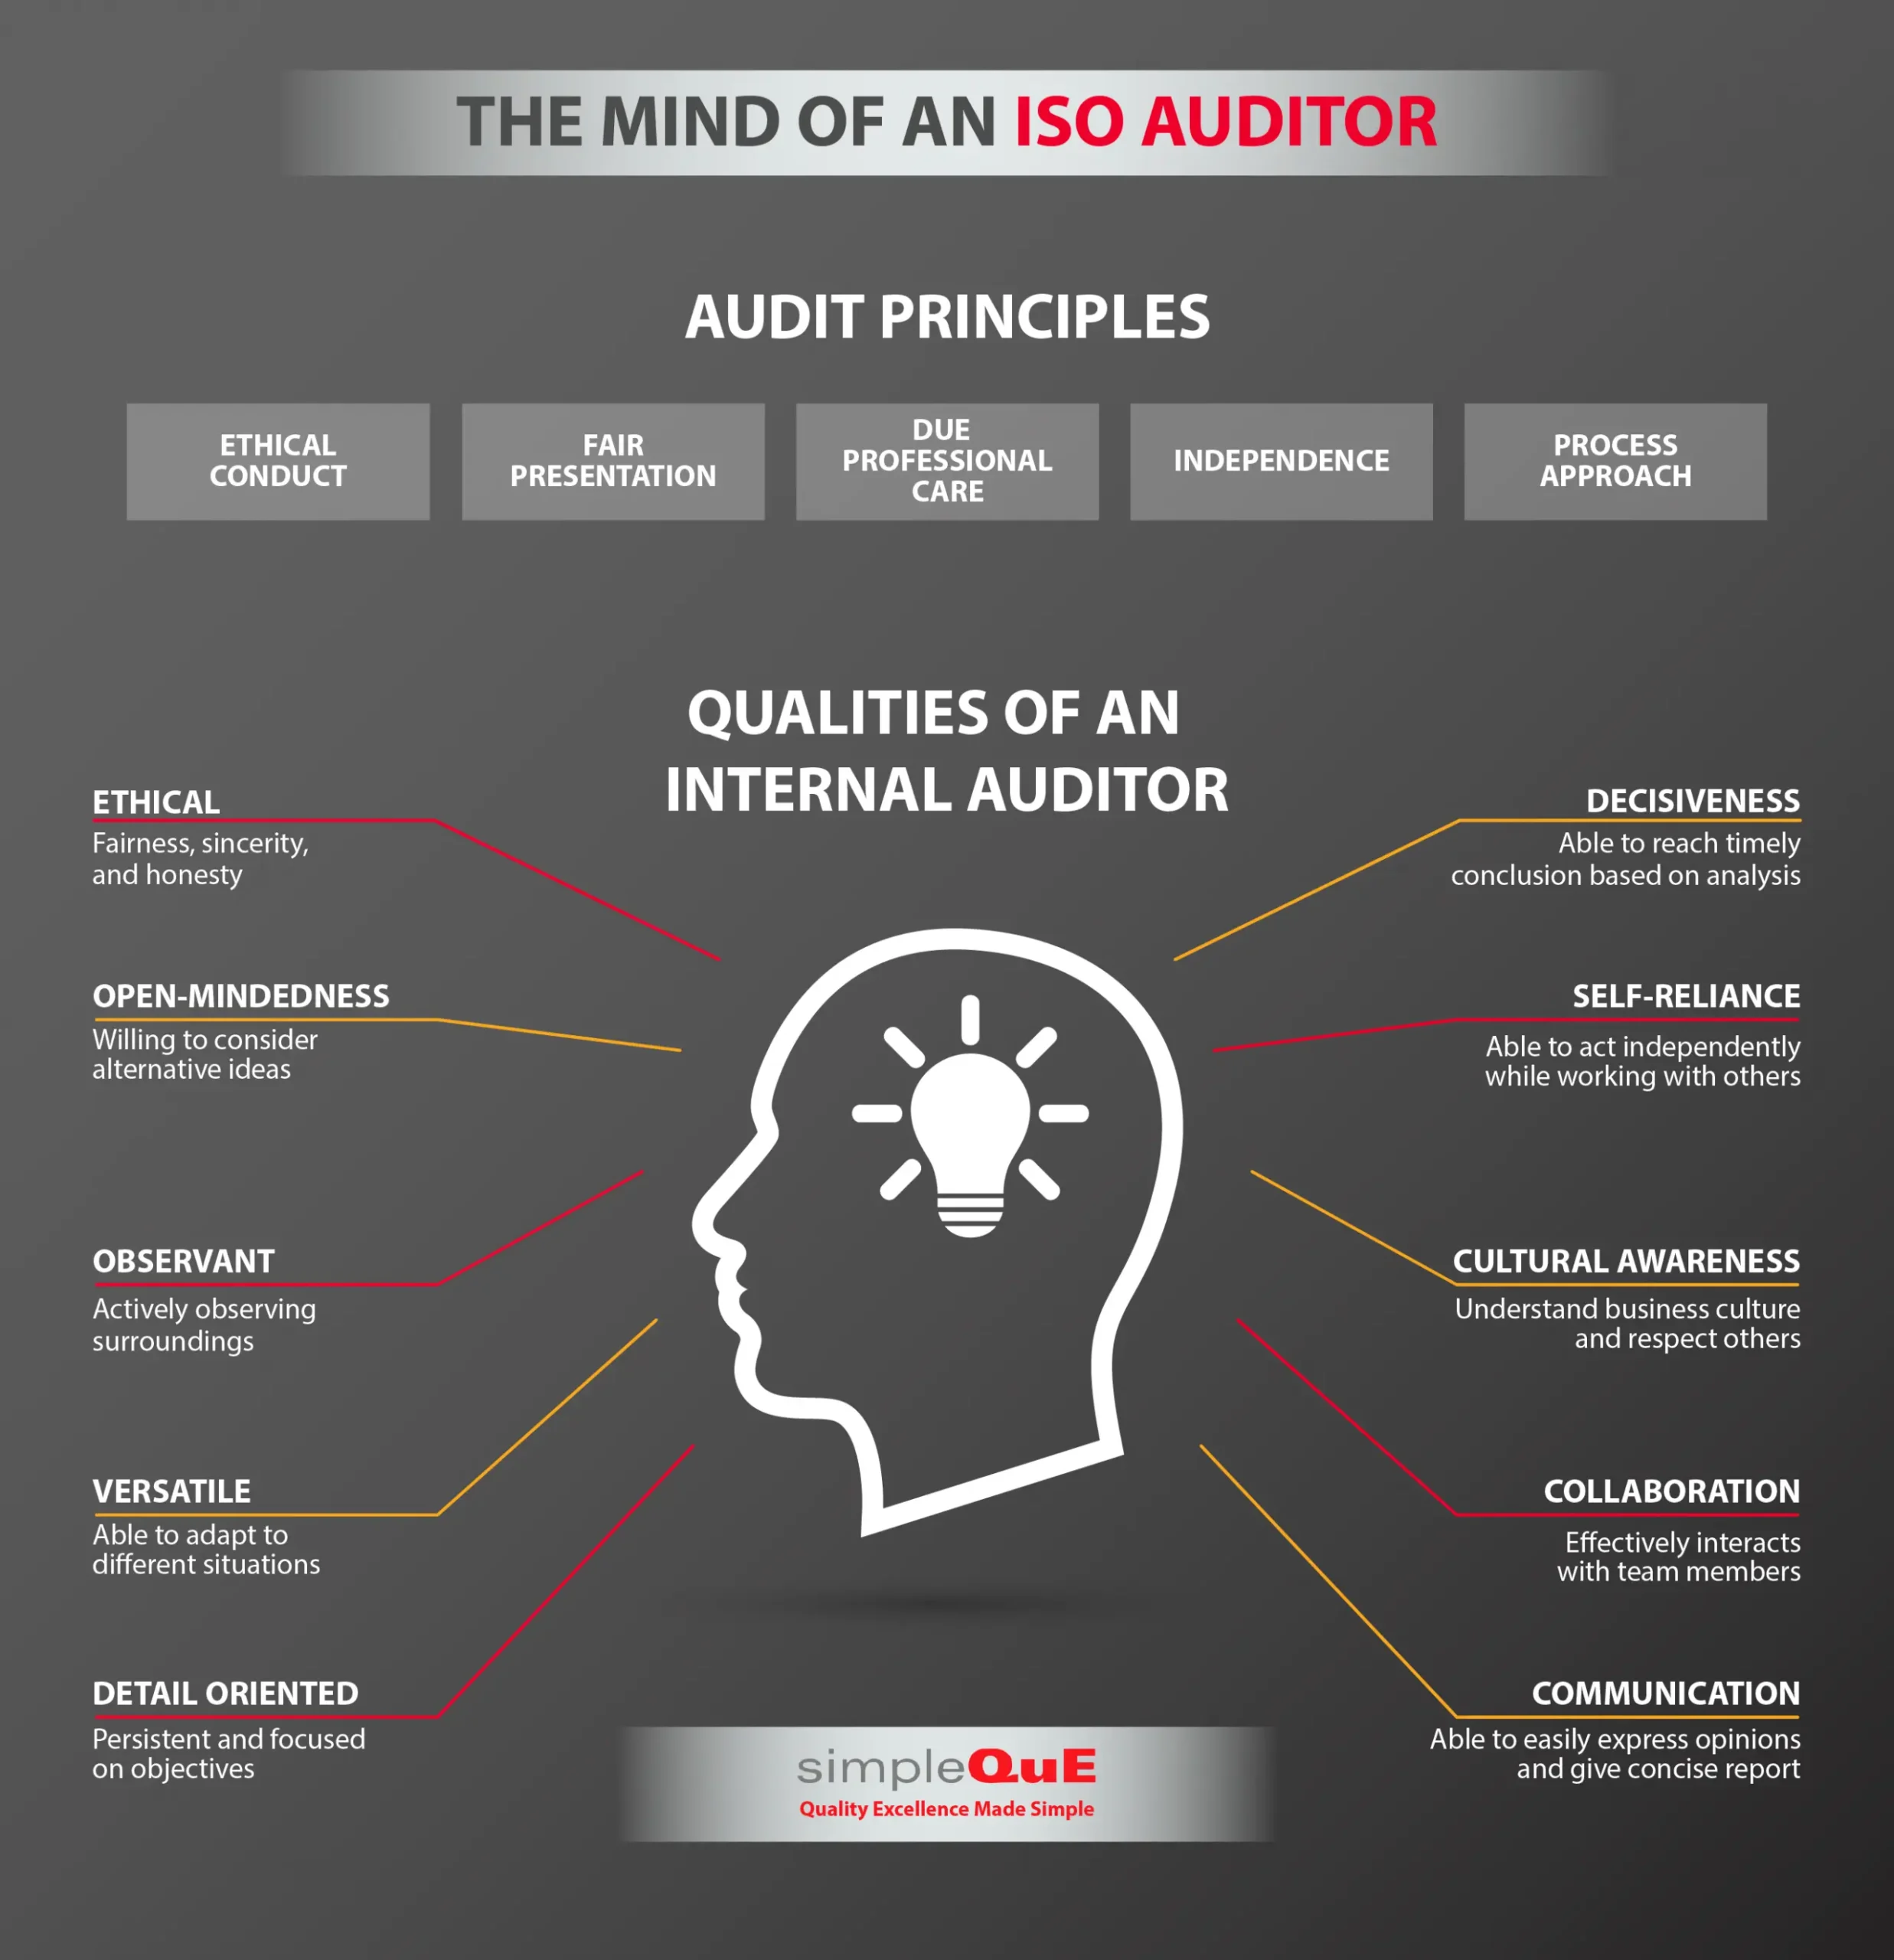 list of things better than being an auditor - Is it better to be an auditor or accountant